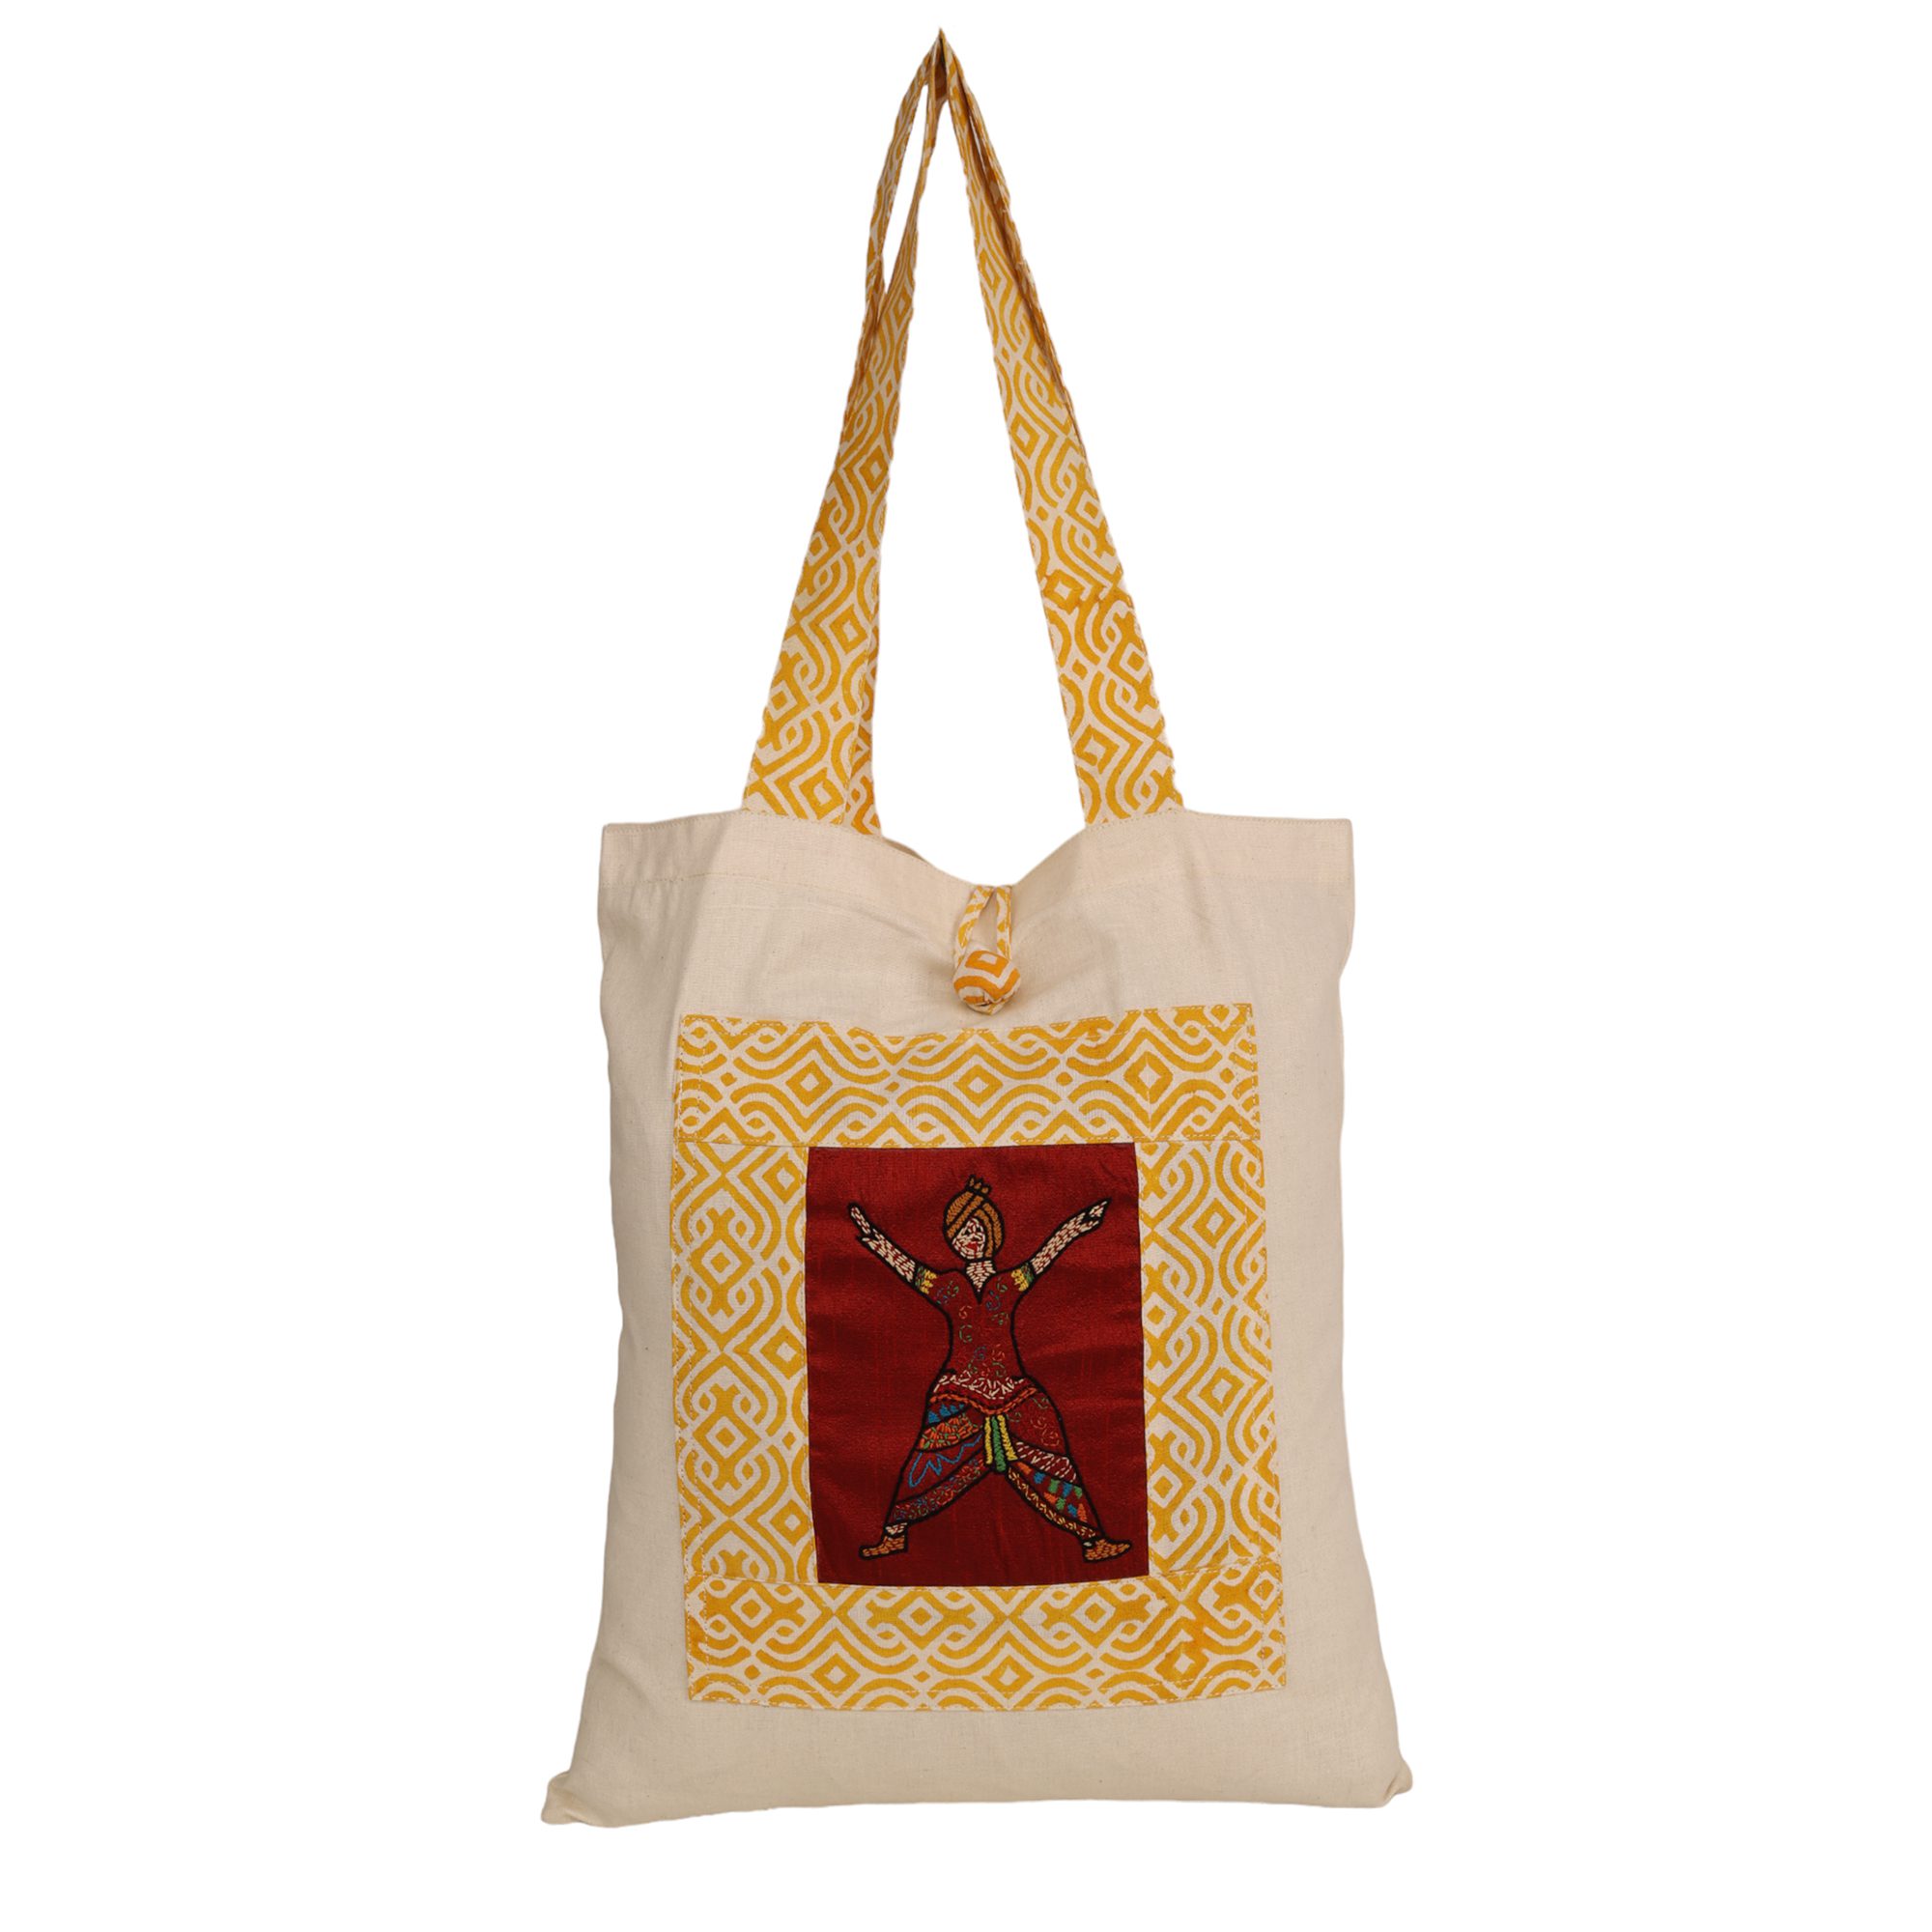 Buy INDHA Cotton Tote Bag Bhangra Embroidery